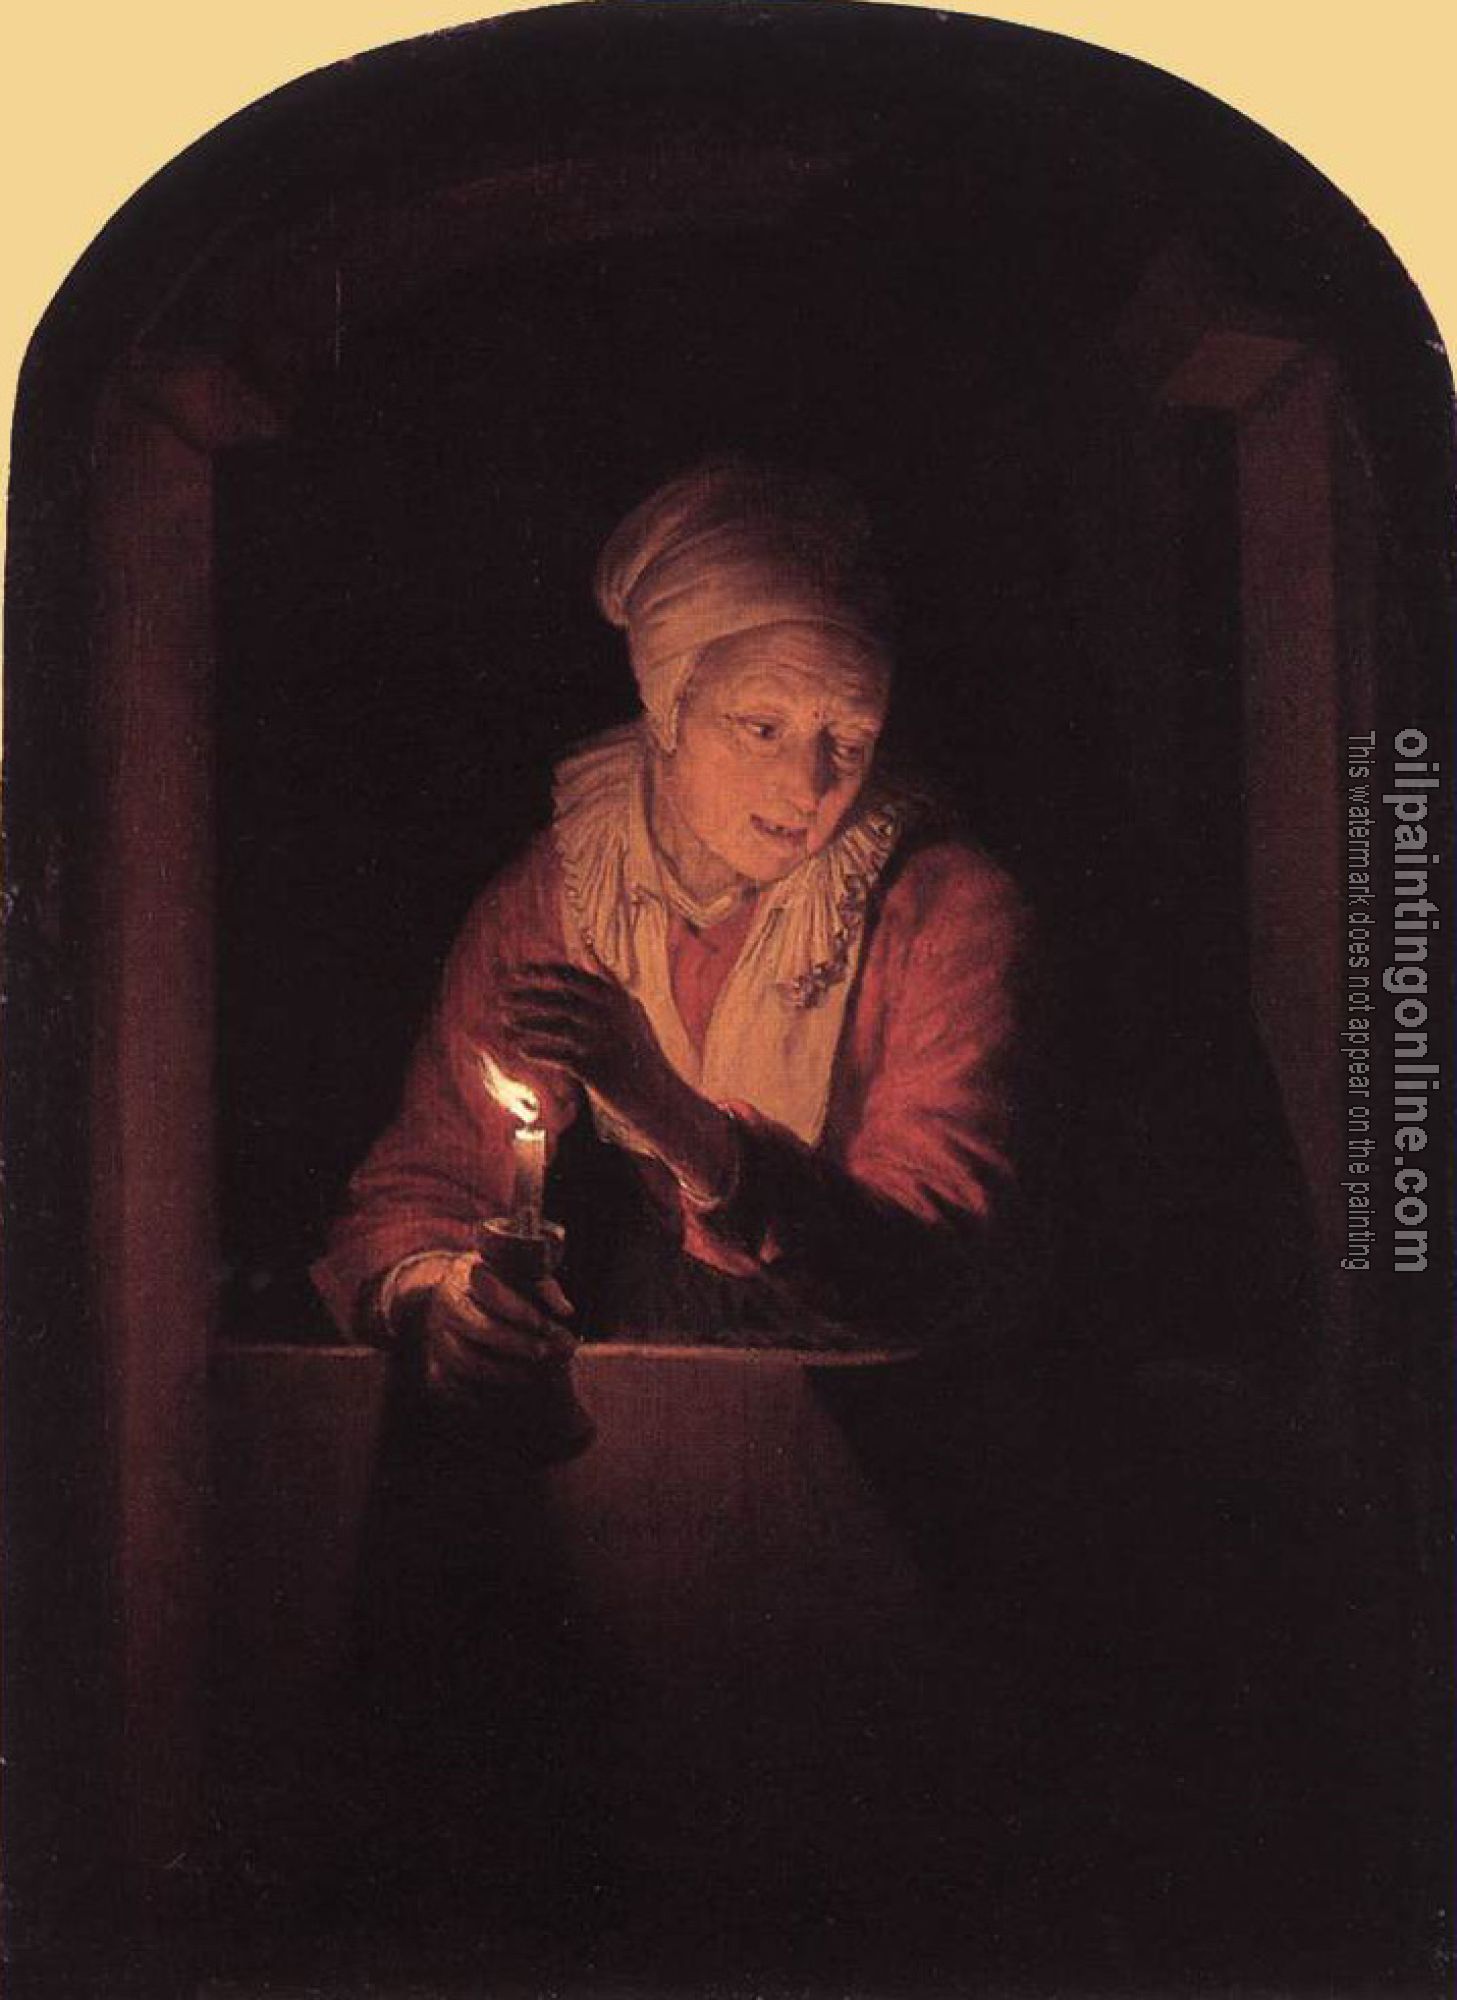 Dou, Gerrit - Old Woman with a Candle